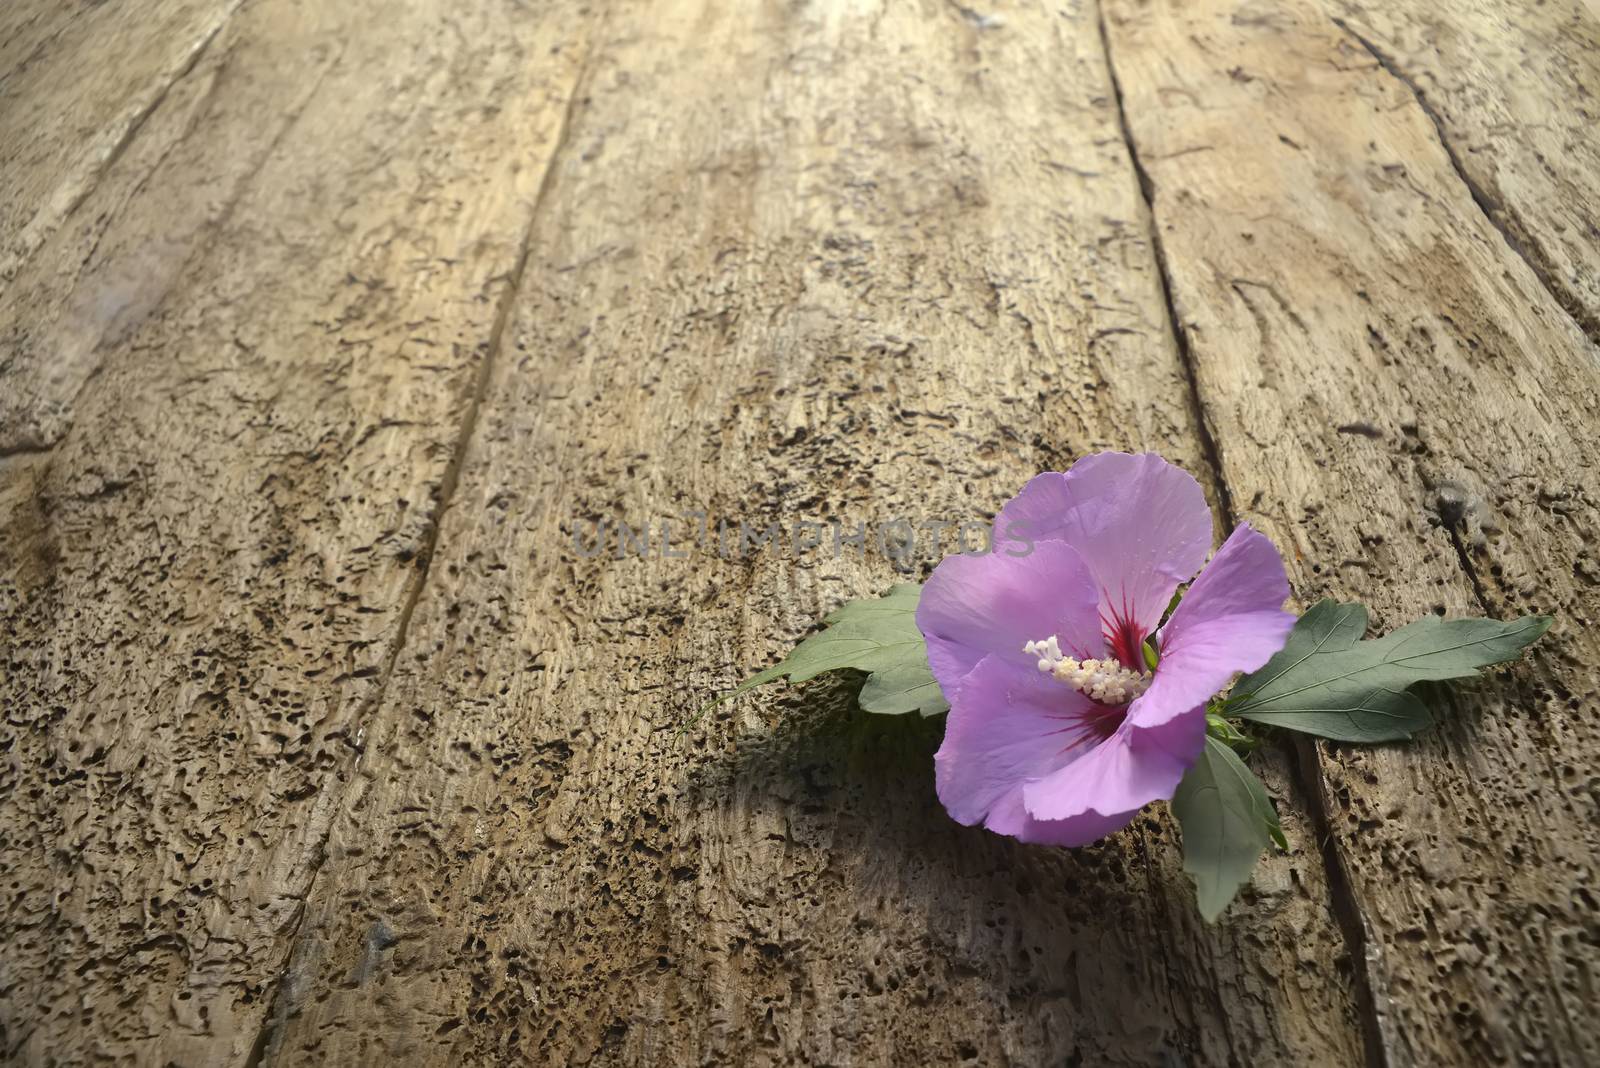 flower on old wood floor by Carche